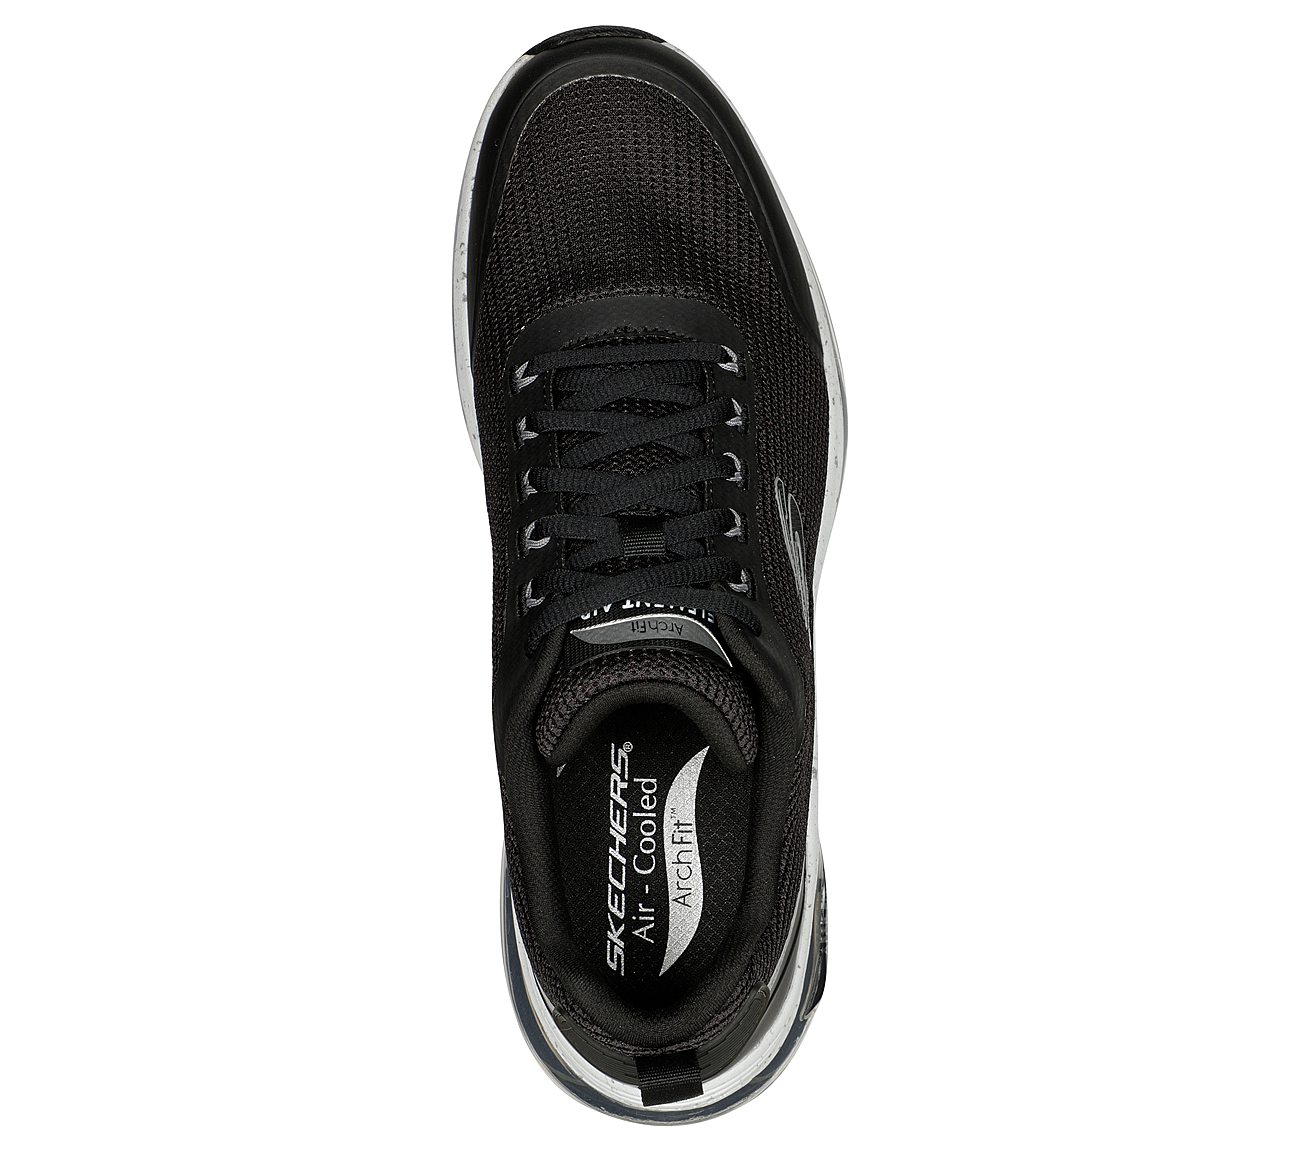 ARCH FIT ELEMENT AIR, BLACK/WHITE Footwear Top View